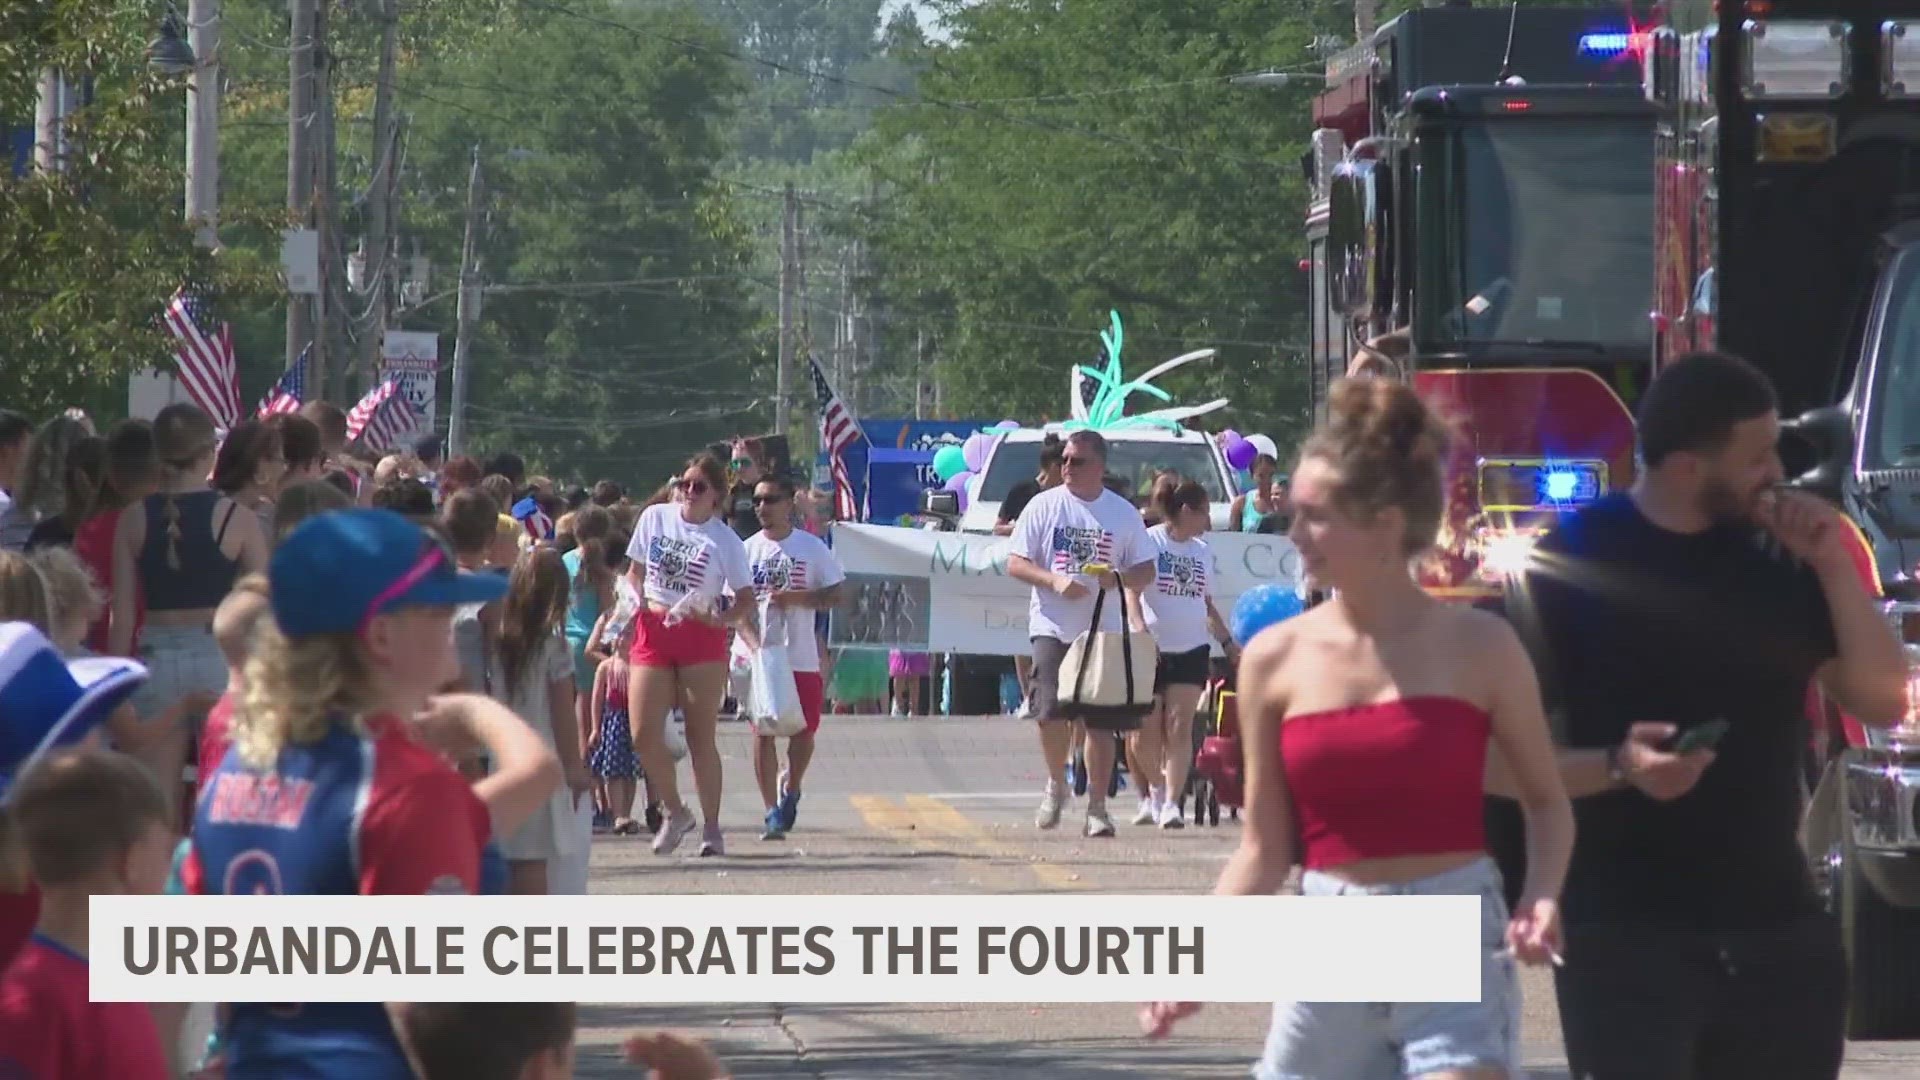 As Urbandale celebrated Independence Day with a parade and plenty of festivities, former Vice President Mike Pence stopped by to celebrate.